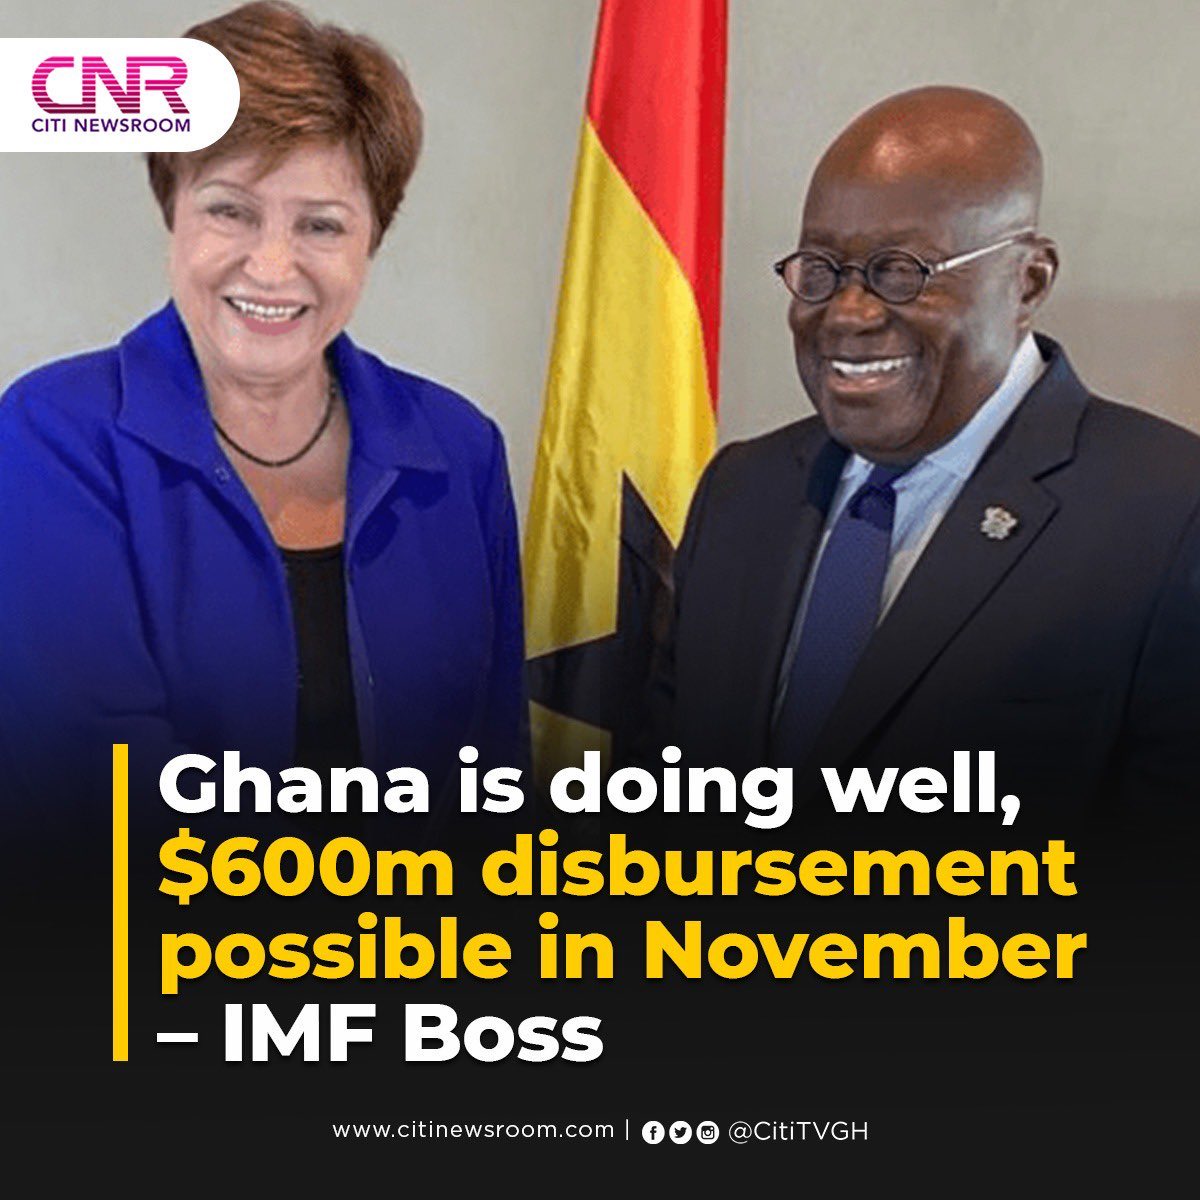 The IMF self is in shock at how rapid we are bouncing back.

You still don't belief in the God of NPP?
#BouncingBack
#PossibleTogether
#GhanaOnTheRightPath